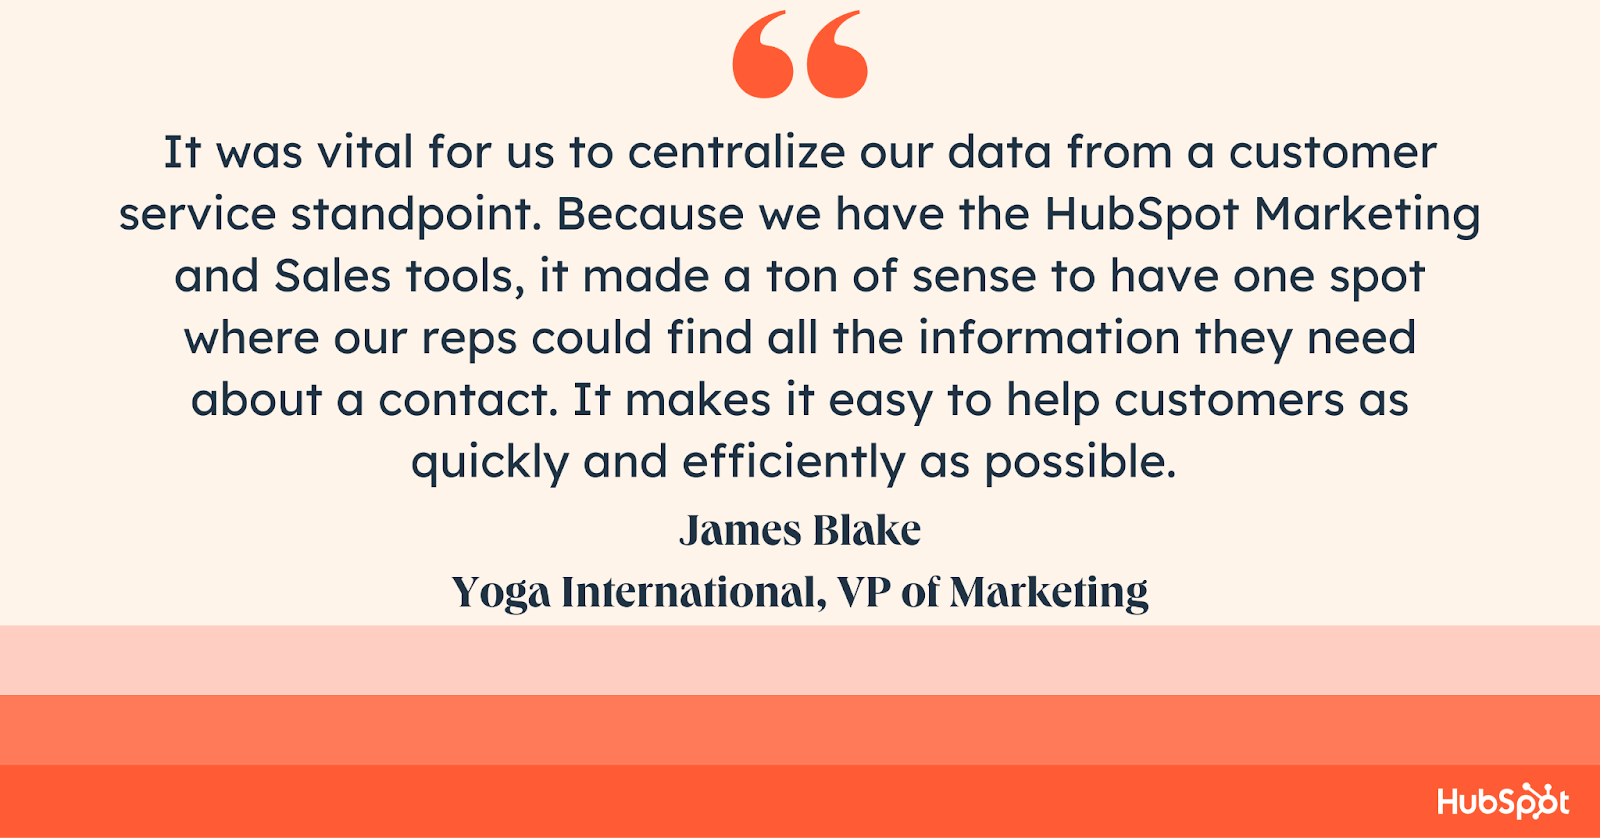 good customer service quote, It was vital for us to centralize our data from a customer service standpoint. Because we have the HubSpot Marketing and Sales tools, it made a ton of sense to have one spot where our reps could find all the information they need about a contact. It makes it easy to help customers as quickly and efficiently as possible. 